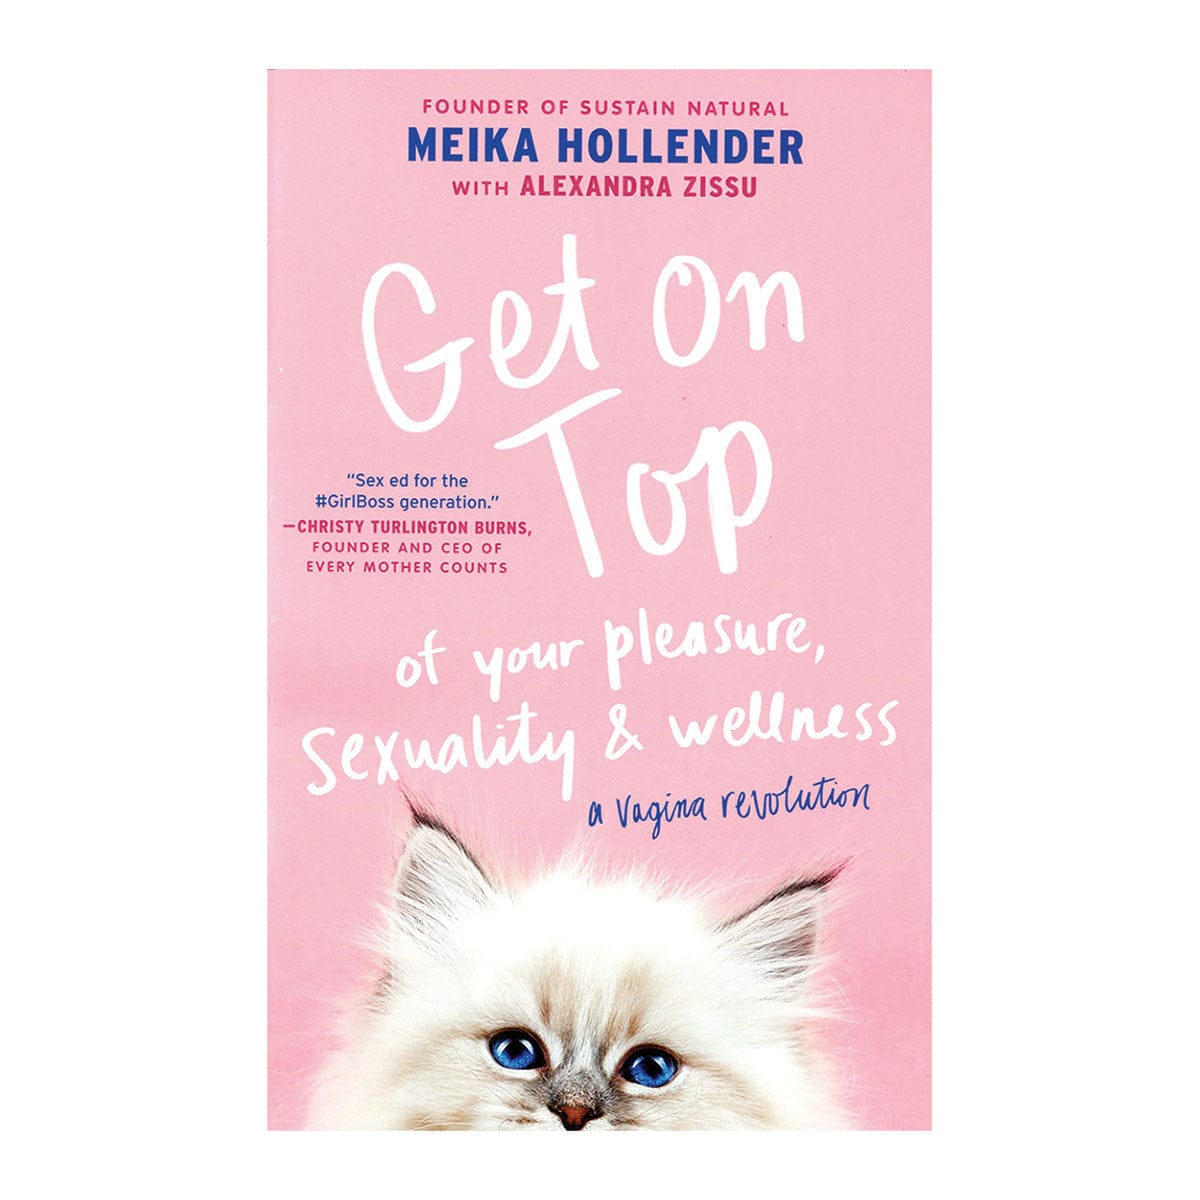 GET ON TOP OF YOUR PLEASURE, SEXUALITY & WELLNESS by Simon + Schuster - rolik